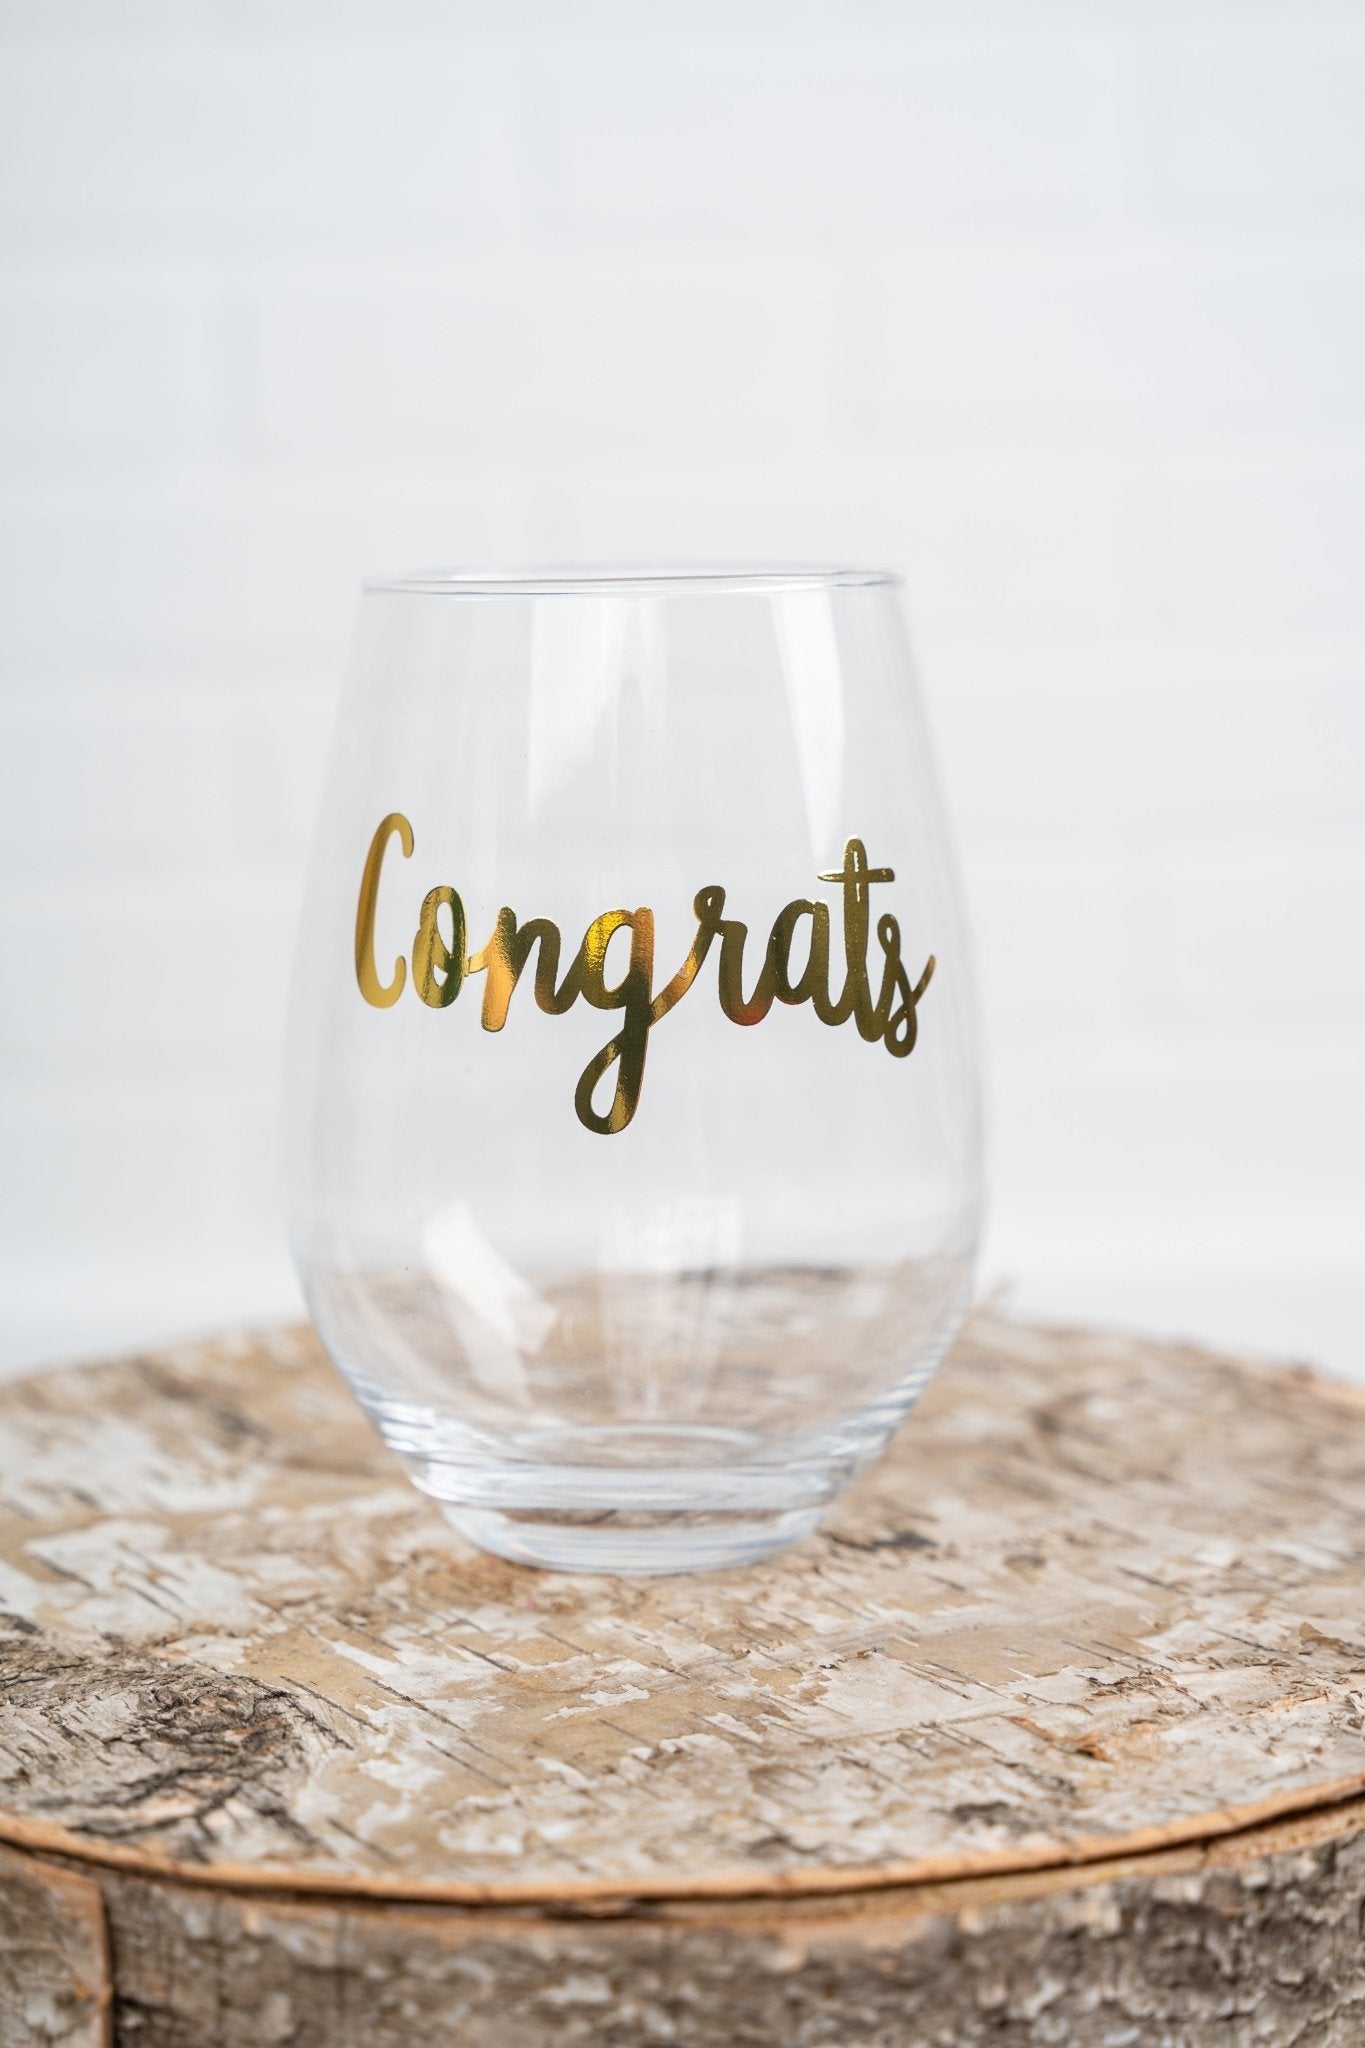 Congrats jumbo wine glass - Trendy Tumblers, Mugs and Cups at Lush Fashion Lounge Boutique in Oklahoma City